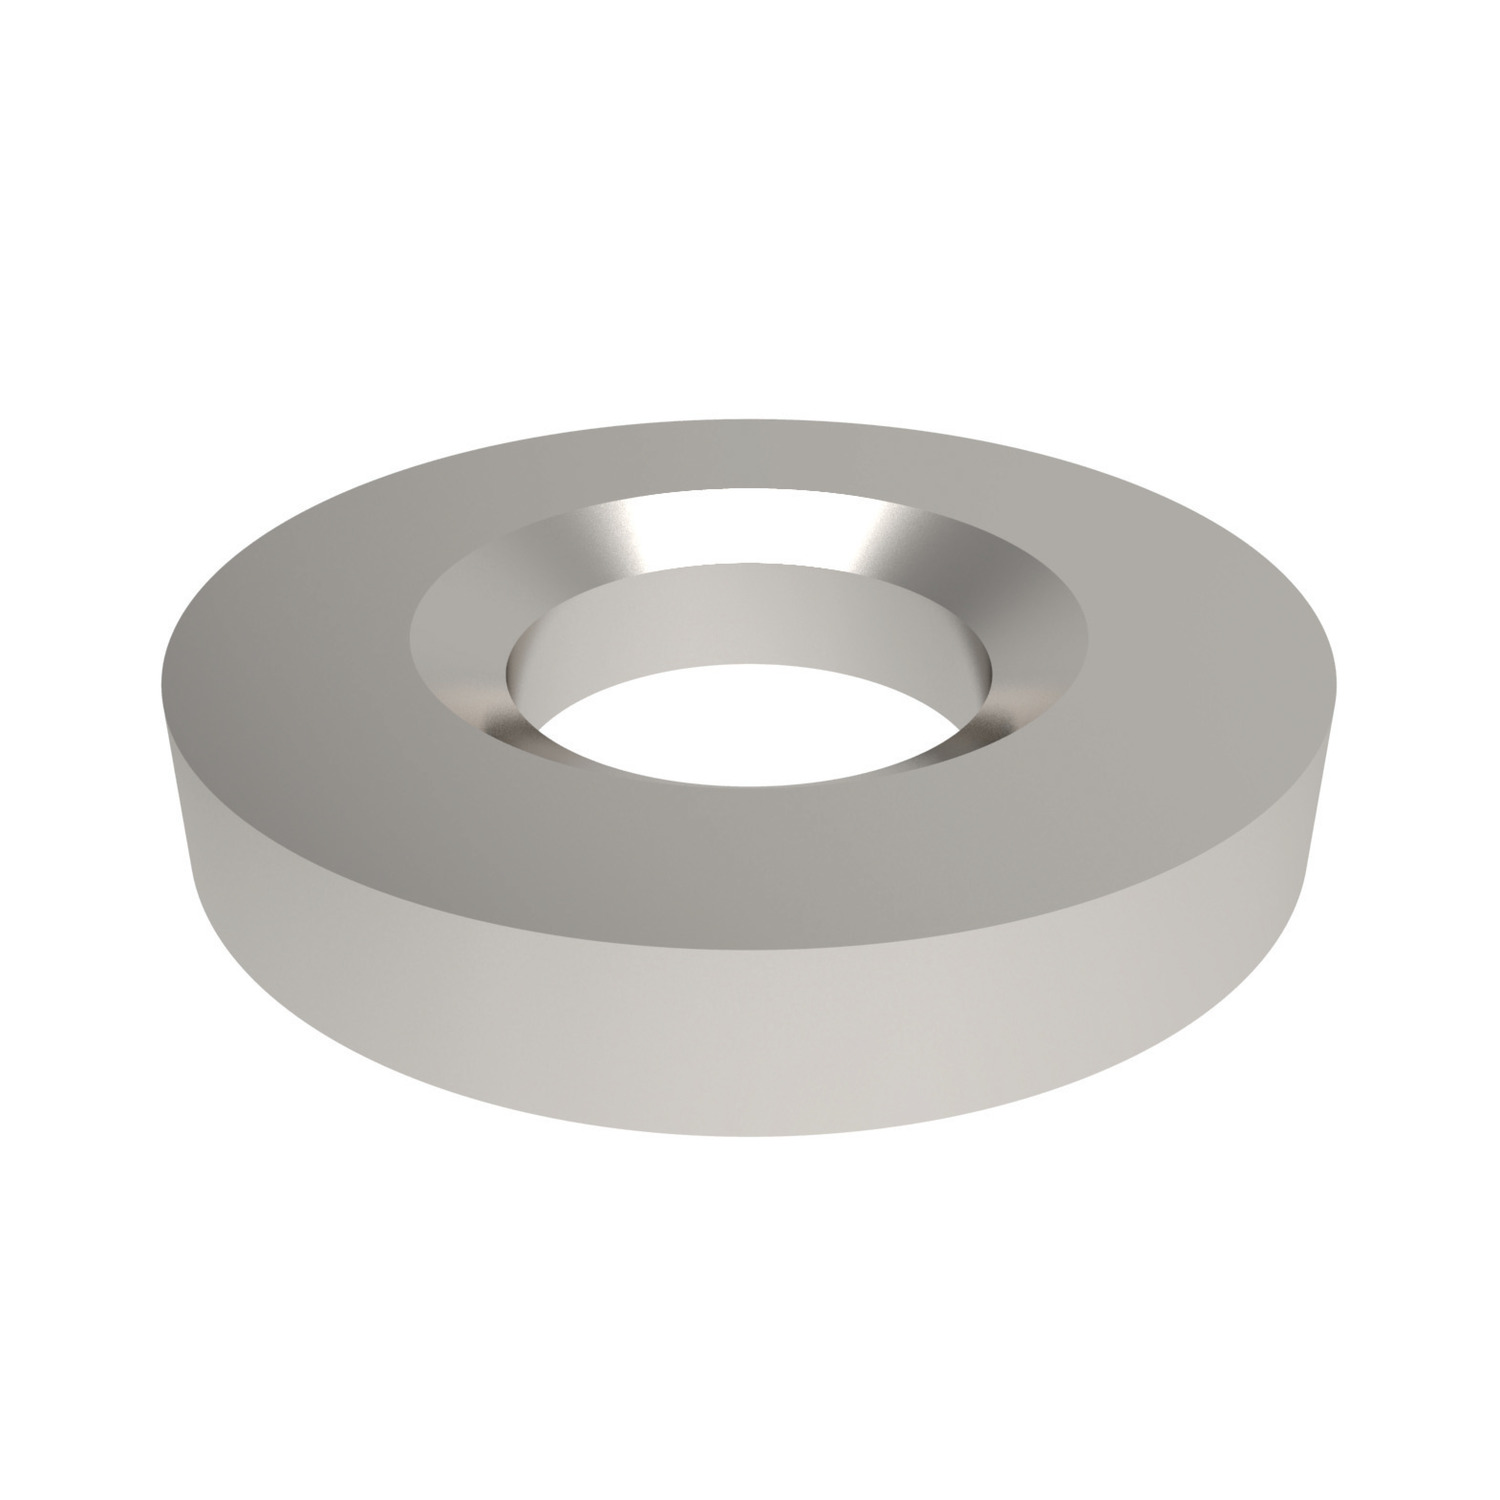 Dished Washers Type G dished washers are ideal to use on slotted clamps due to their large diameter and thickness. Made in tempered stainless to DIN 6319G.